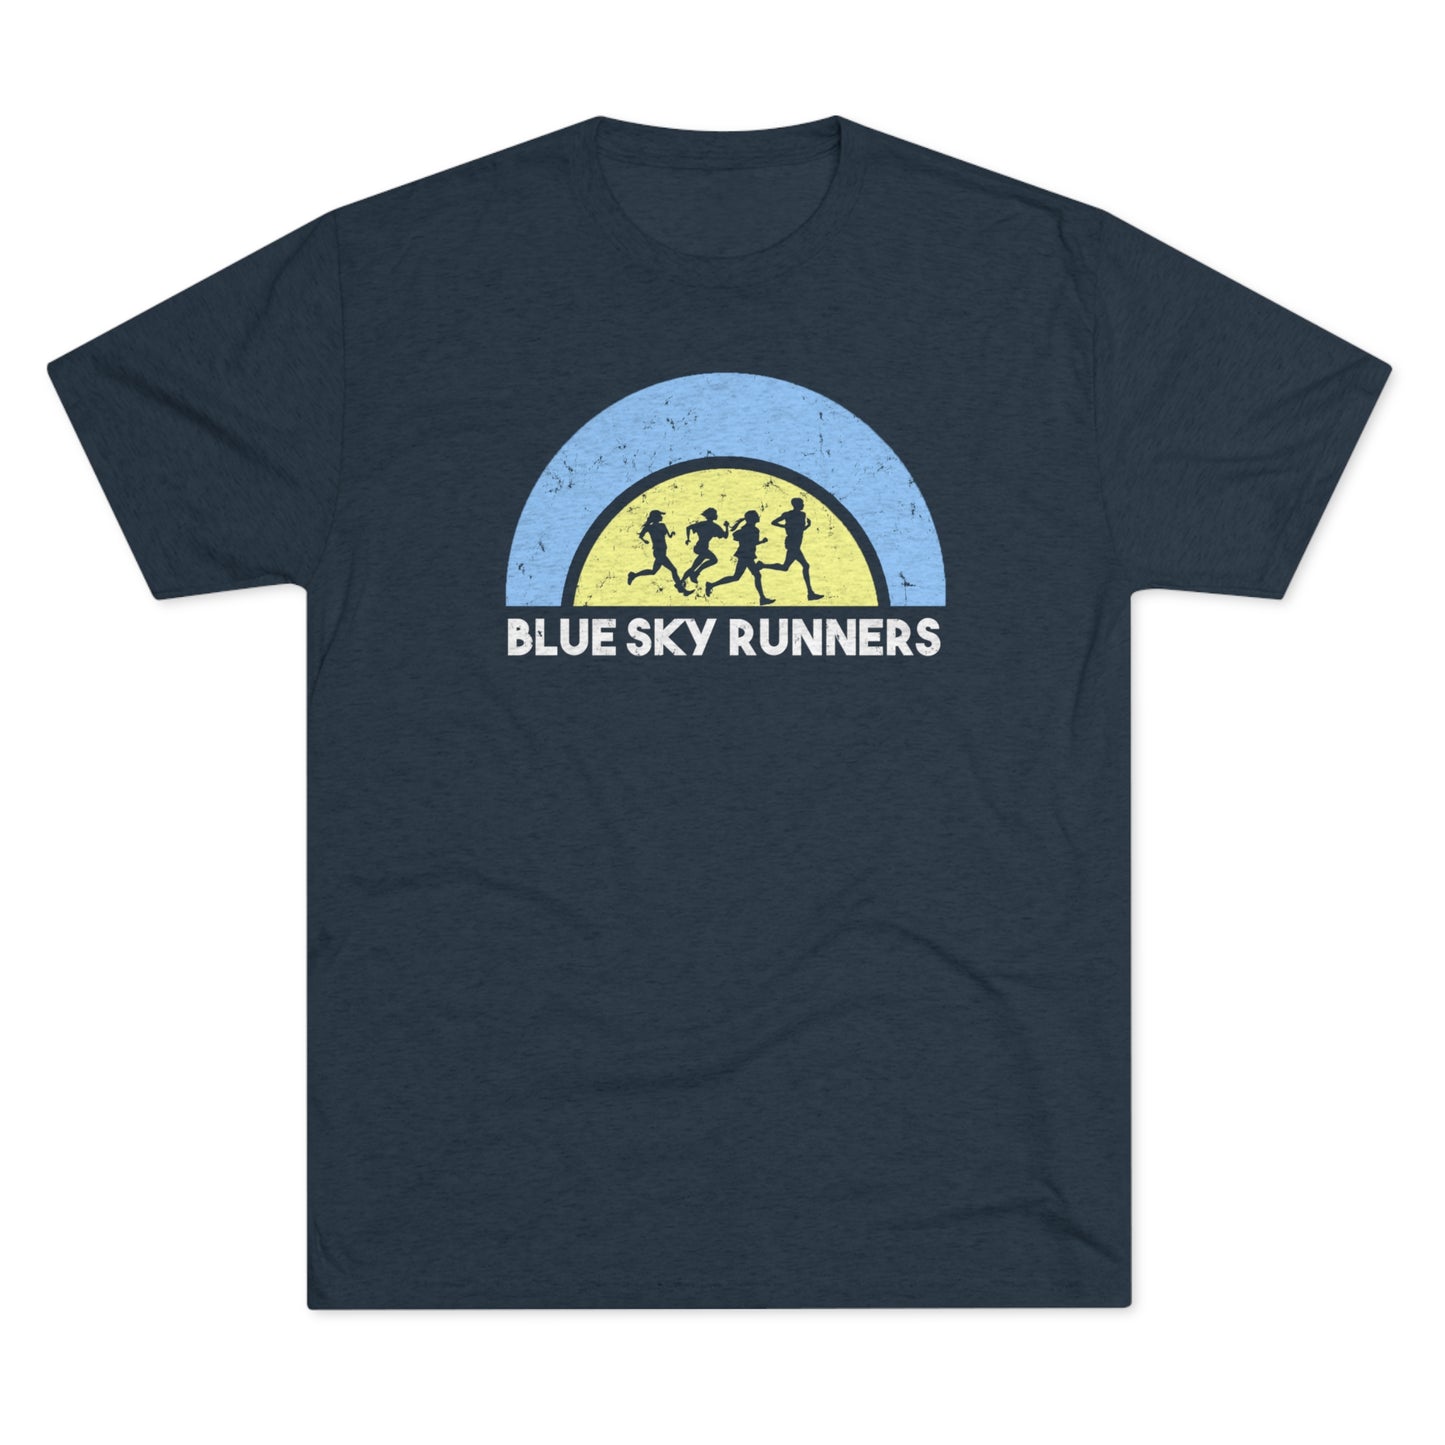 The Blue Sky Unisex Tri-Blend Crew Tee by Printify in navy blue features a graphic of four runners in silhouette inside a semi-circle, with the text "Blue Sky Runners" below. Made from tri-blend fabric, this high-quality regular fit tee boasts a gradient from blue at the top to yellow at the bottom.